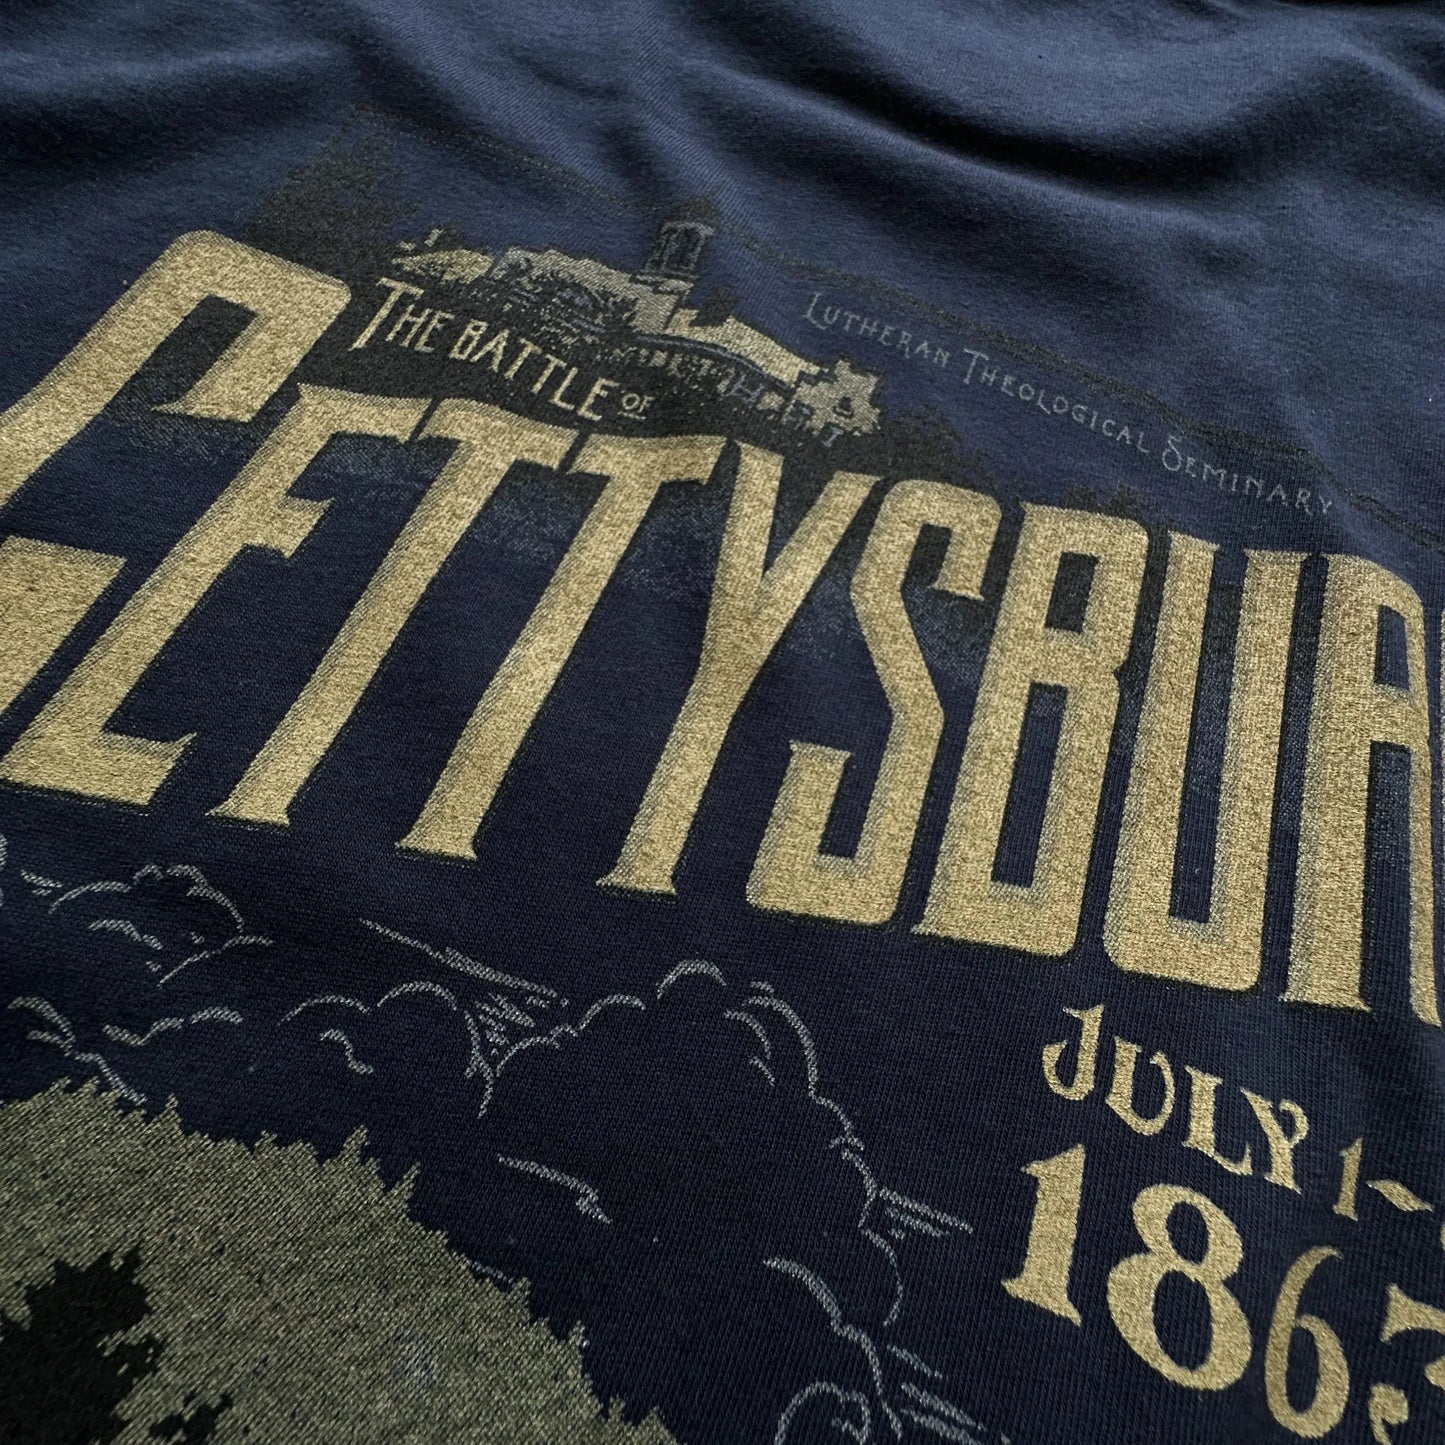 Close-up of back of "The Battle of Gettysburg" Long-sleeved shirt from The History List store